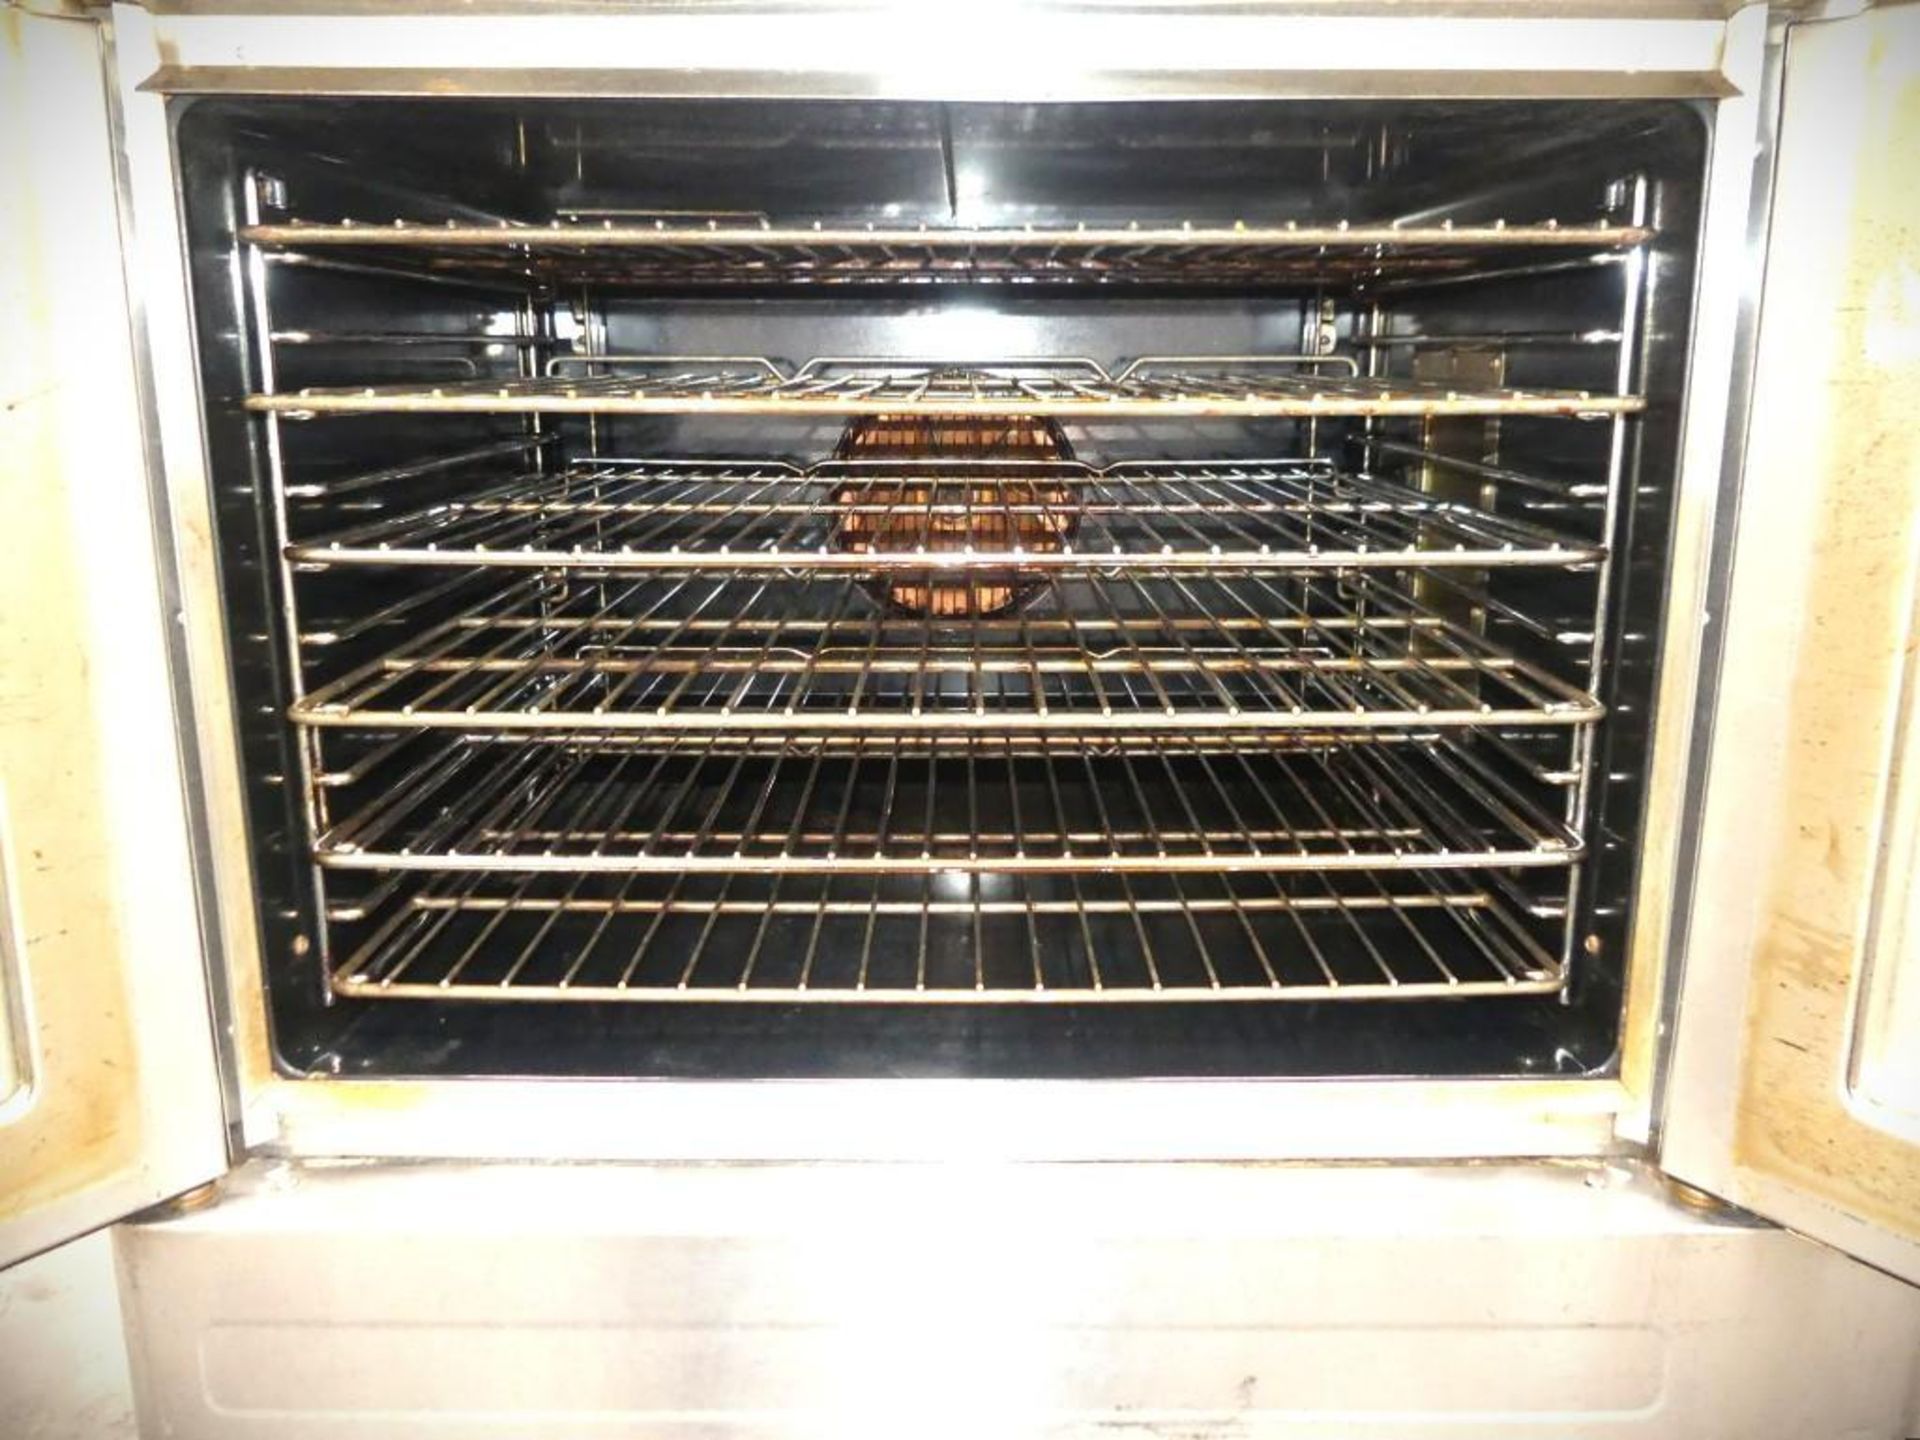 Blodget Double Stacked Stainless Steel Electric Oven - Image 18 of 30